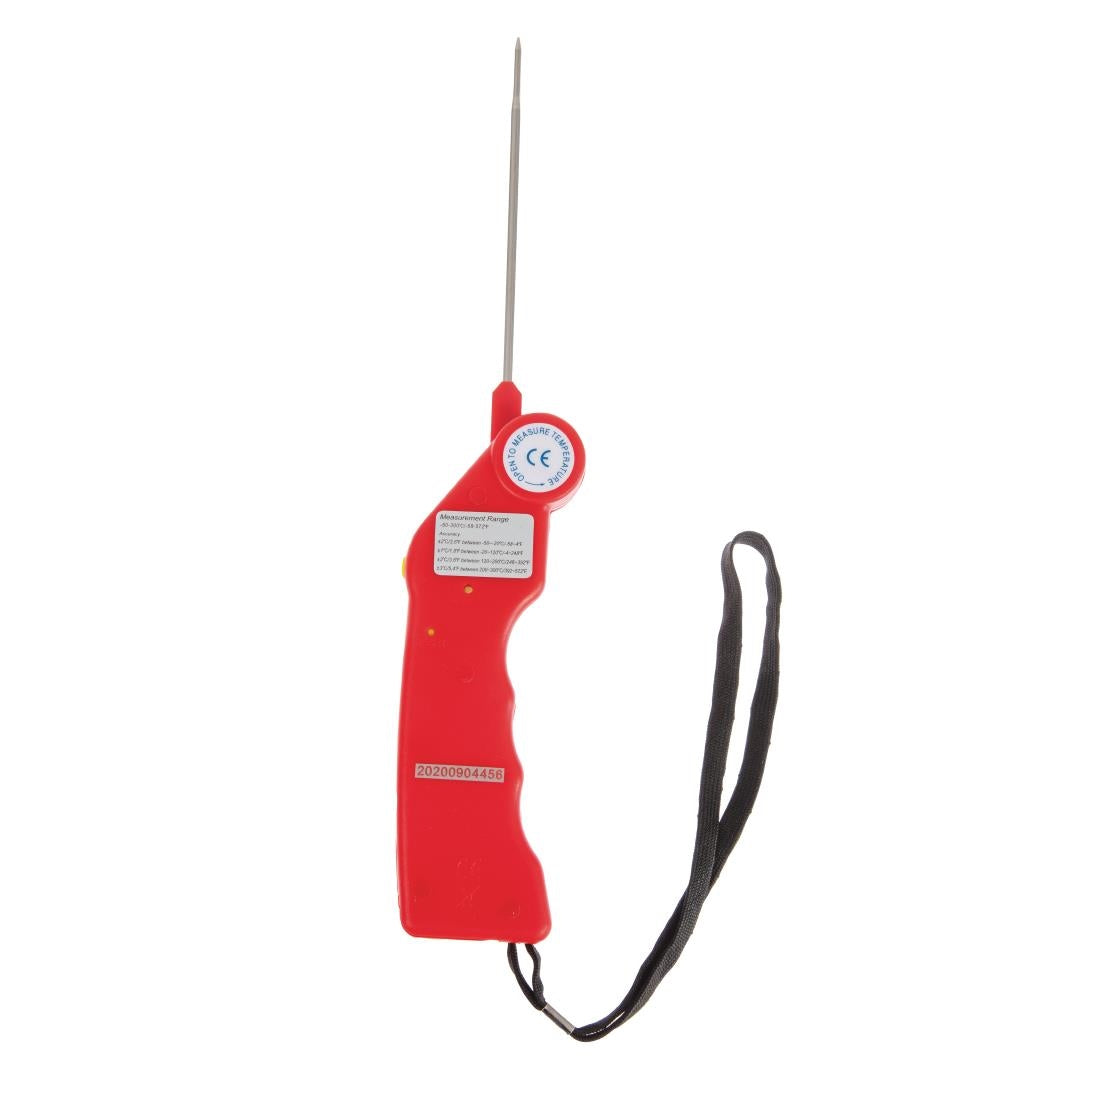 Hygiplas Easytemp Colour Coded Red Thermometer JD Catering Equipment Solutions Ltd